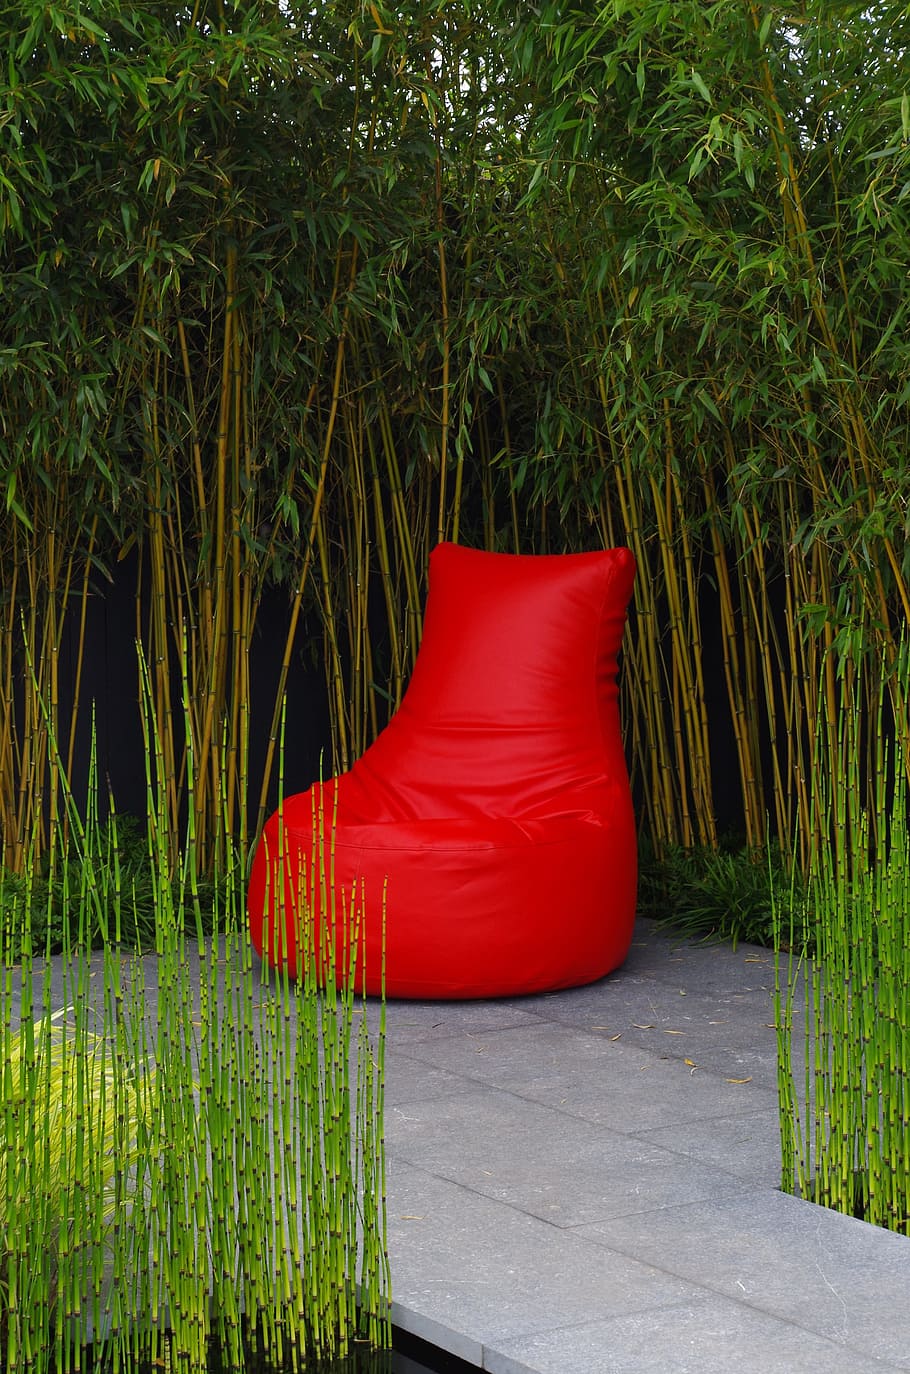 red bean bag, mindset, faq, red, green, chair, trees, willow, reeds, bamboo